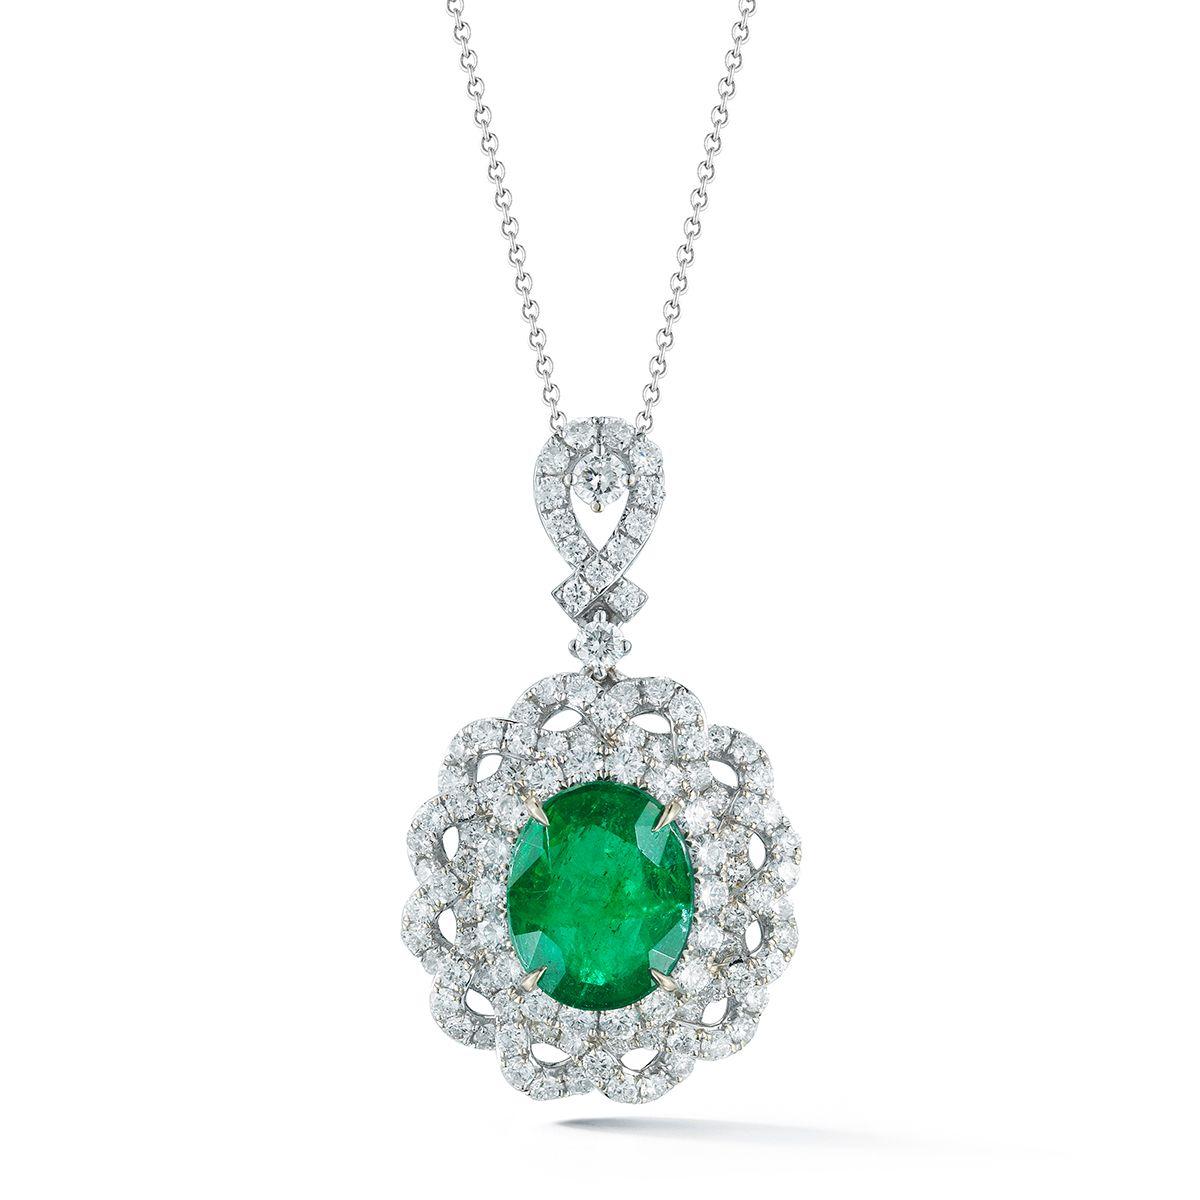 EMERALD AND DIAMOND
PENDANT
A delicate diamond halo accentuates a beautiful green emerald.
Item: # 02619
Metal: 18k W
Color Weight: 3.64 ct.
Diamond Weight: 2.00 ct.